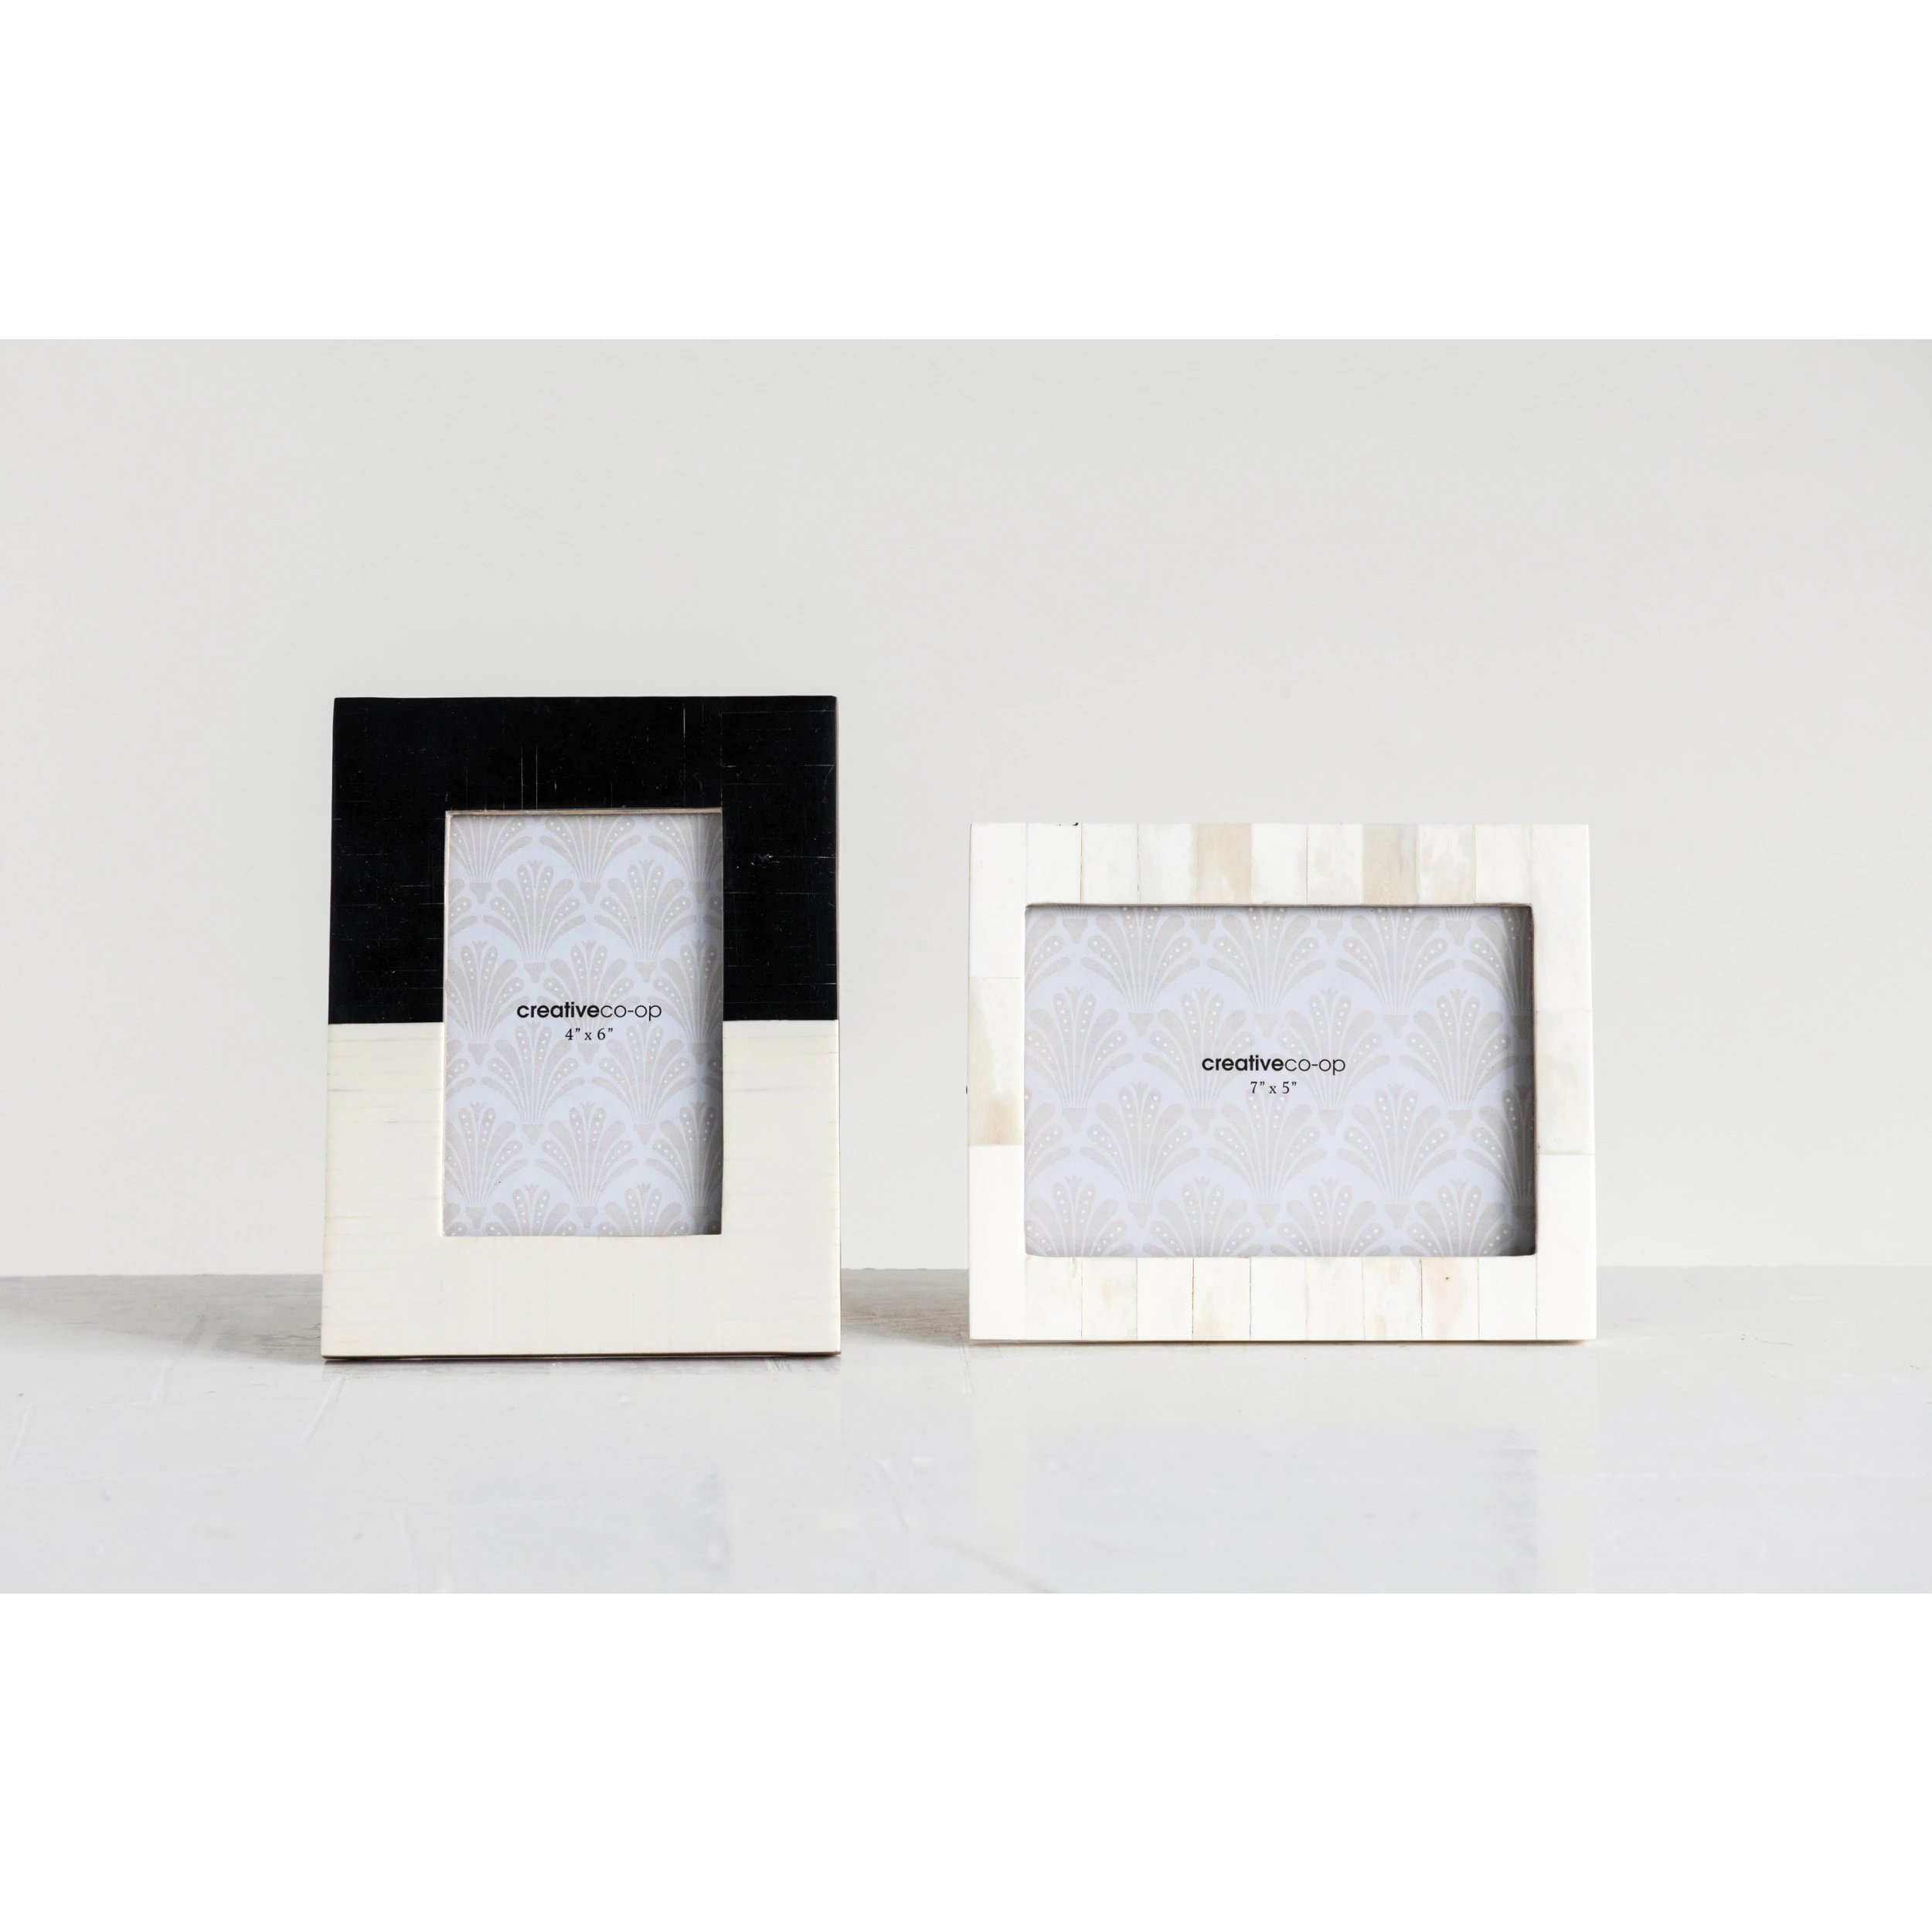 White Resin Photo Frame with Beige Accents (Holds 5" x 7" Photo) - Image 2